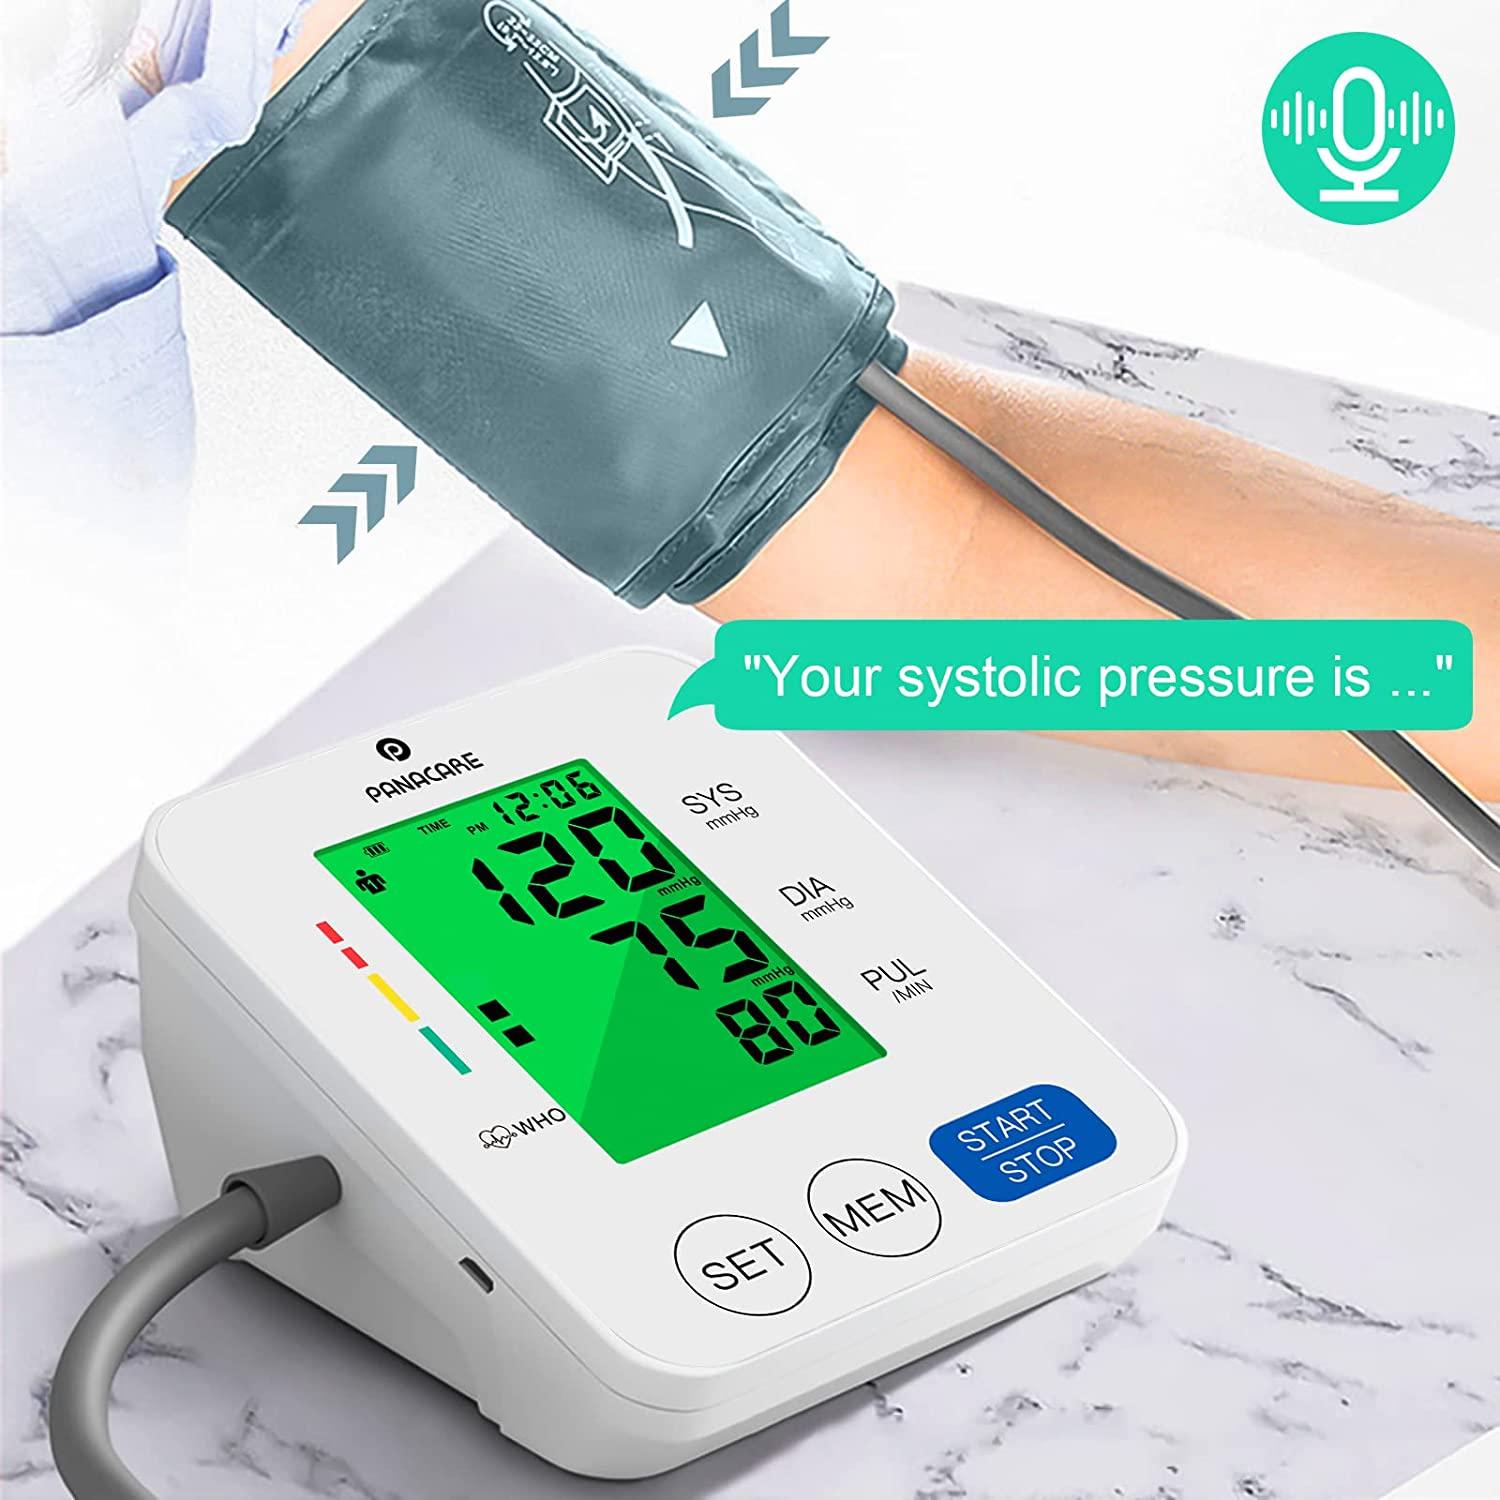 Large Cuff Easy@Home Digital Upper Arm Blood Pressure Monitor, 3-Color